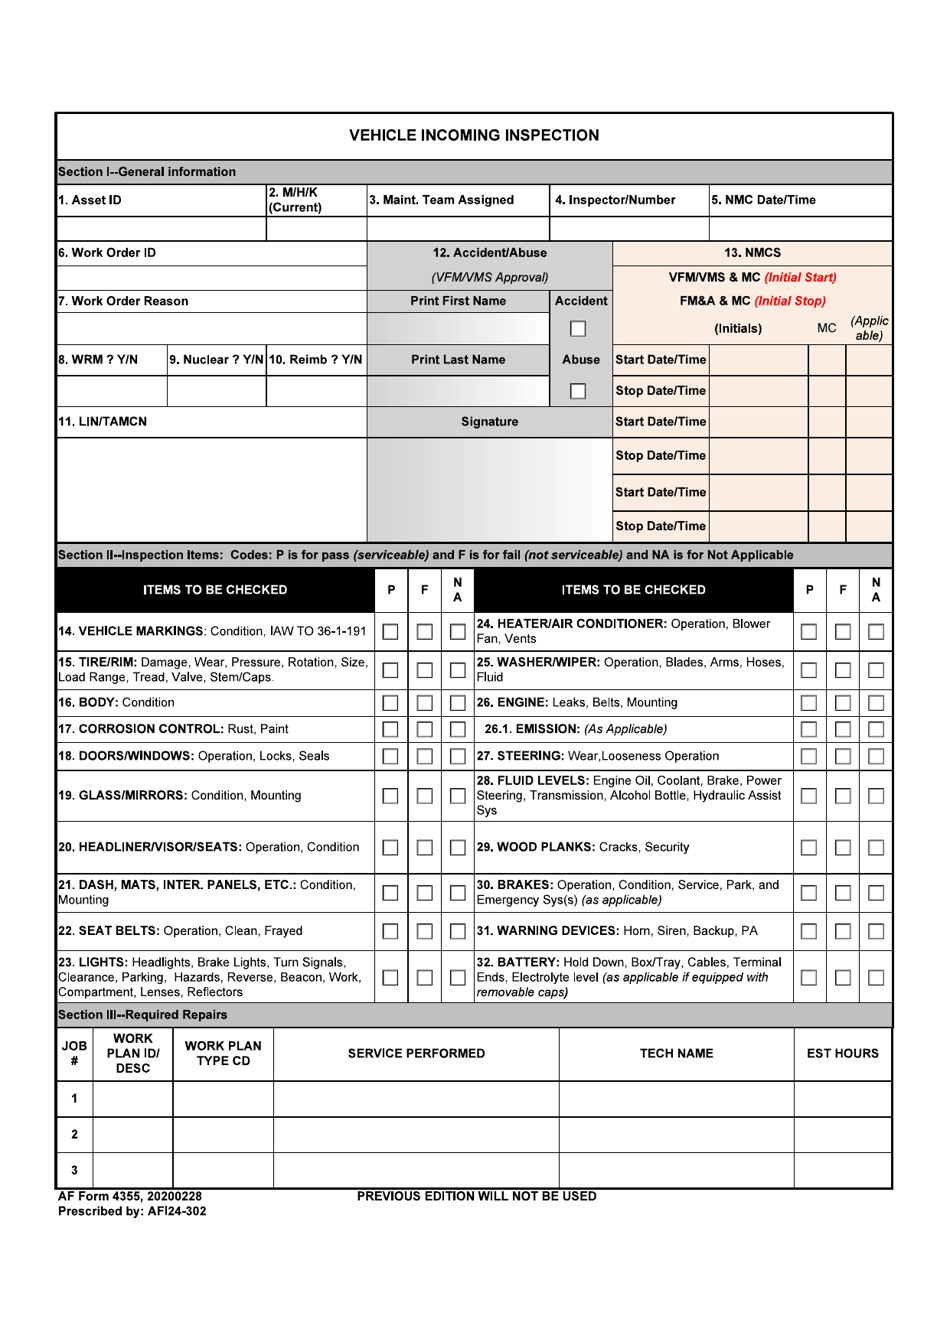 AF Form 4355 Vehicle Incoming Inspection, Page 1